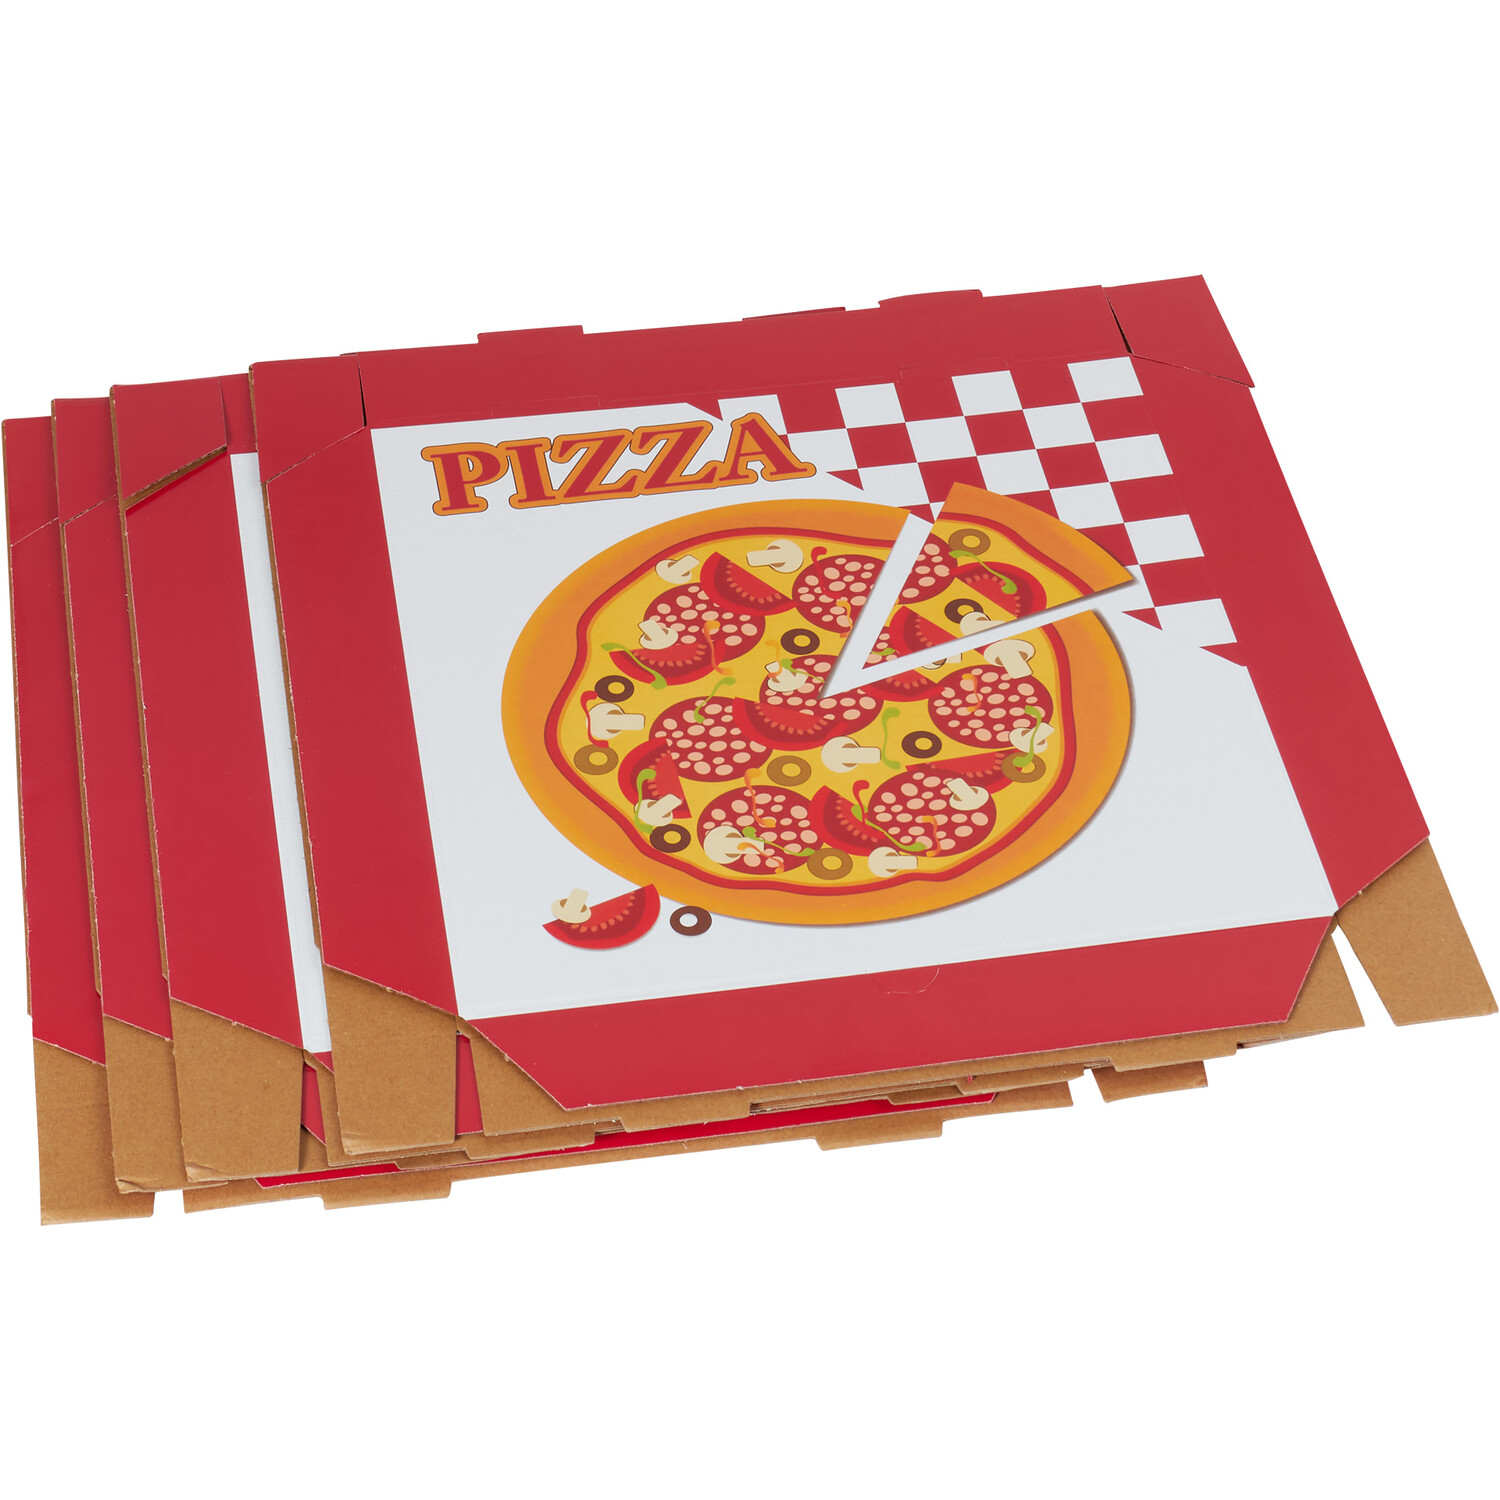 Pack of 4 Pizza Boxes - White Image 2